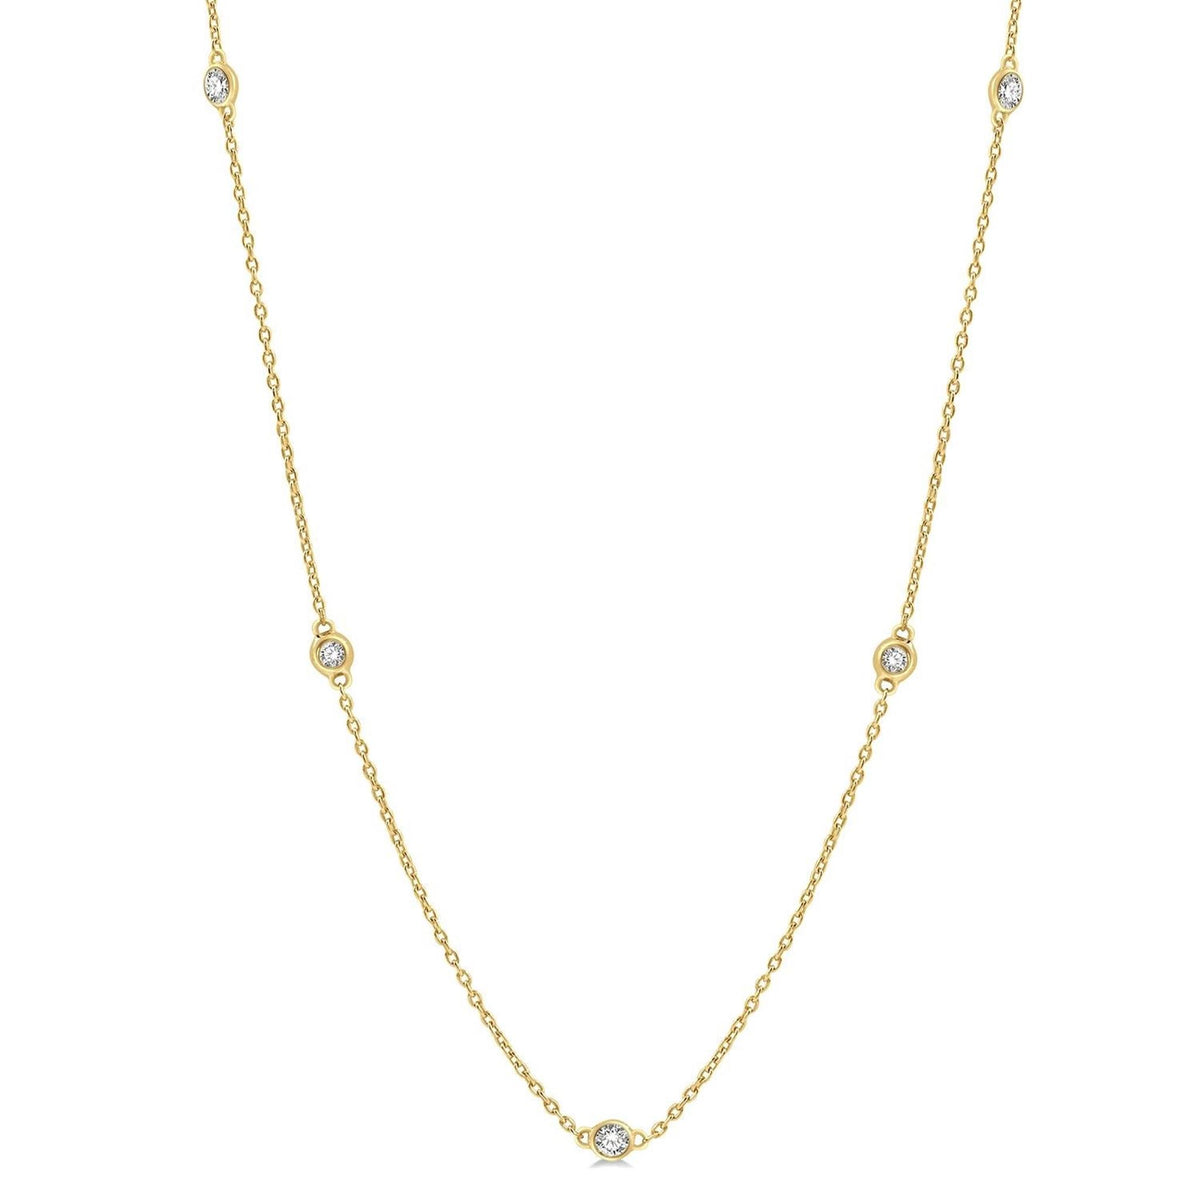 Milestone 14Kt Yellow Gold Diamonds-By-The-Yard Necklace With .25cttw Natural Diamonds